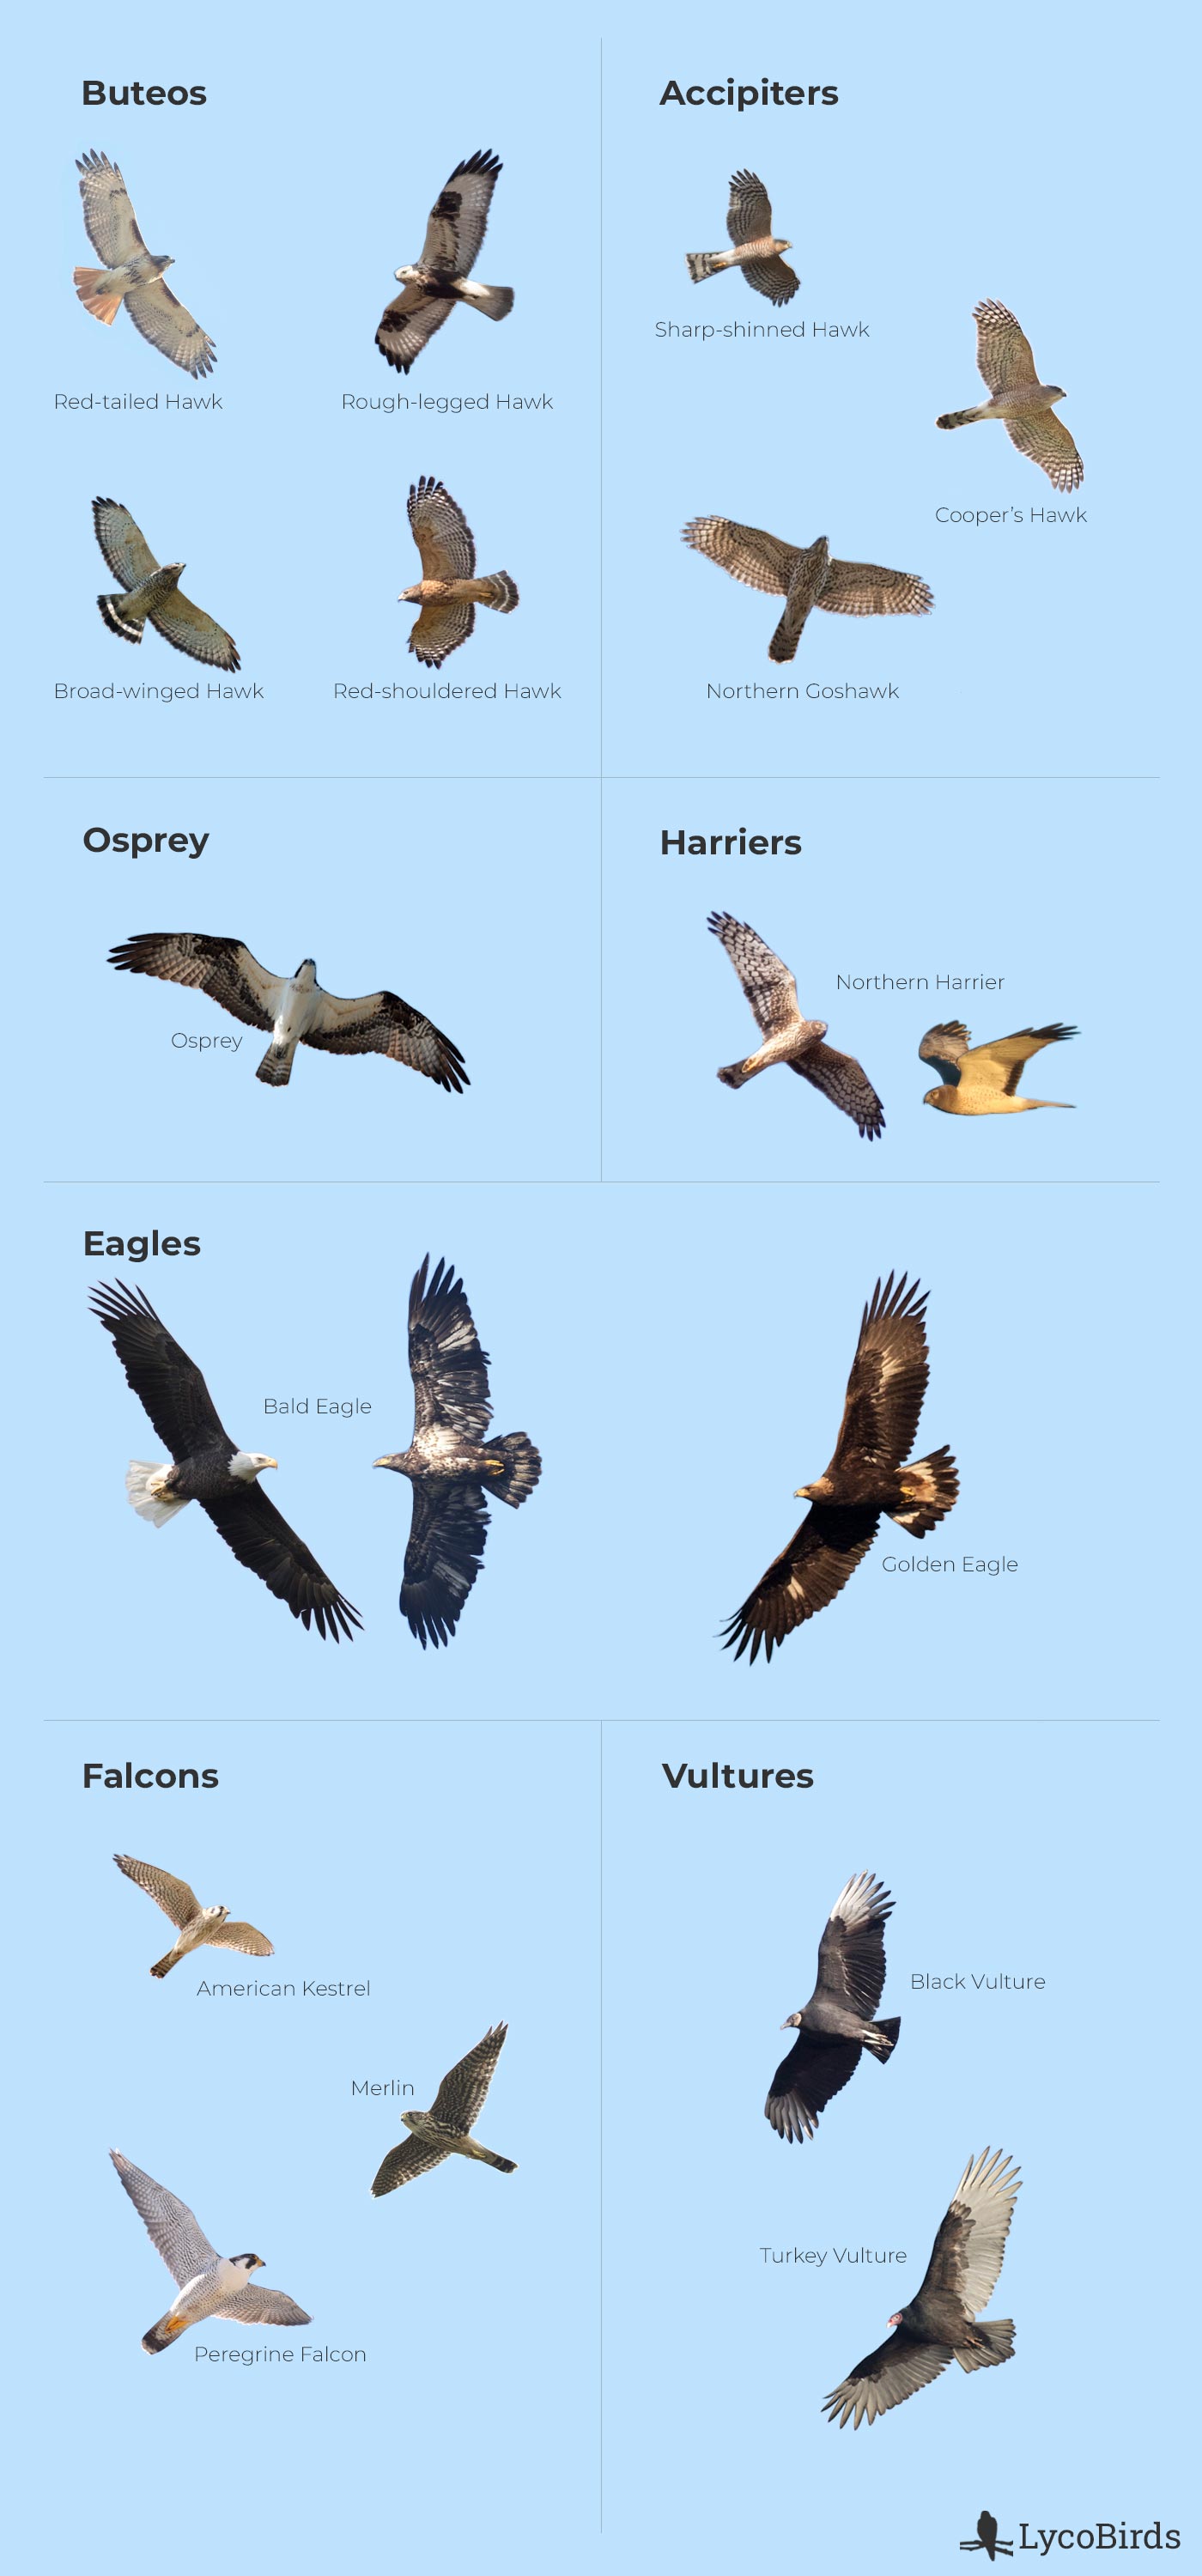 British birds of prey guide: how to identify raptors and where to